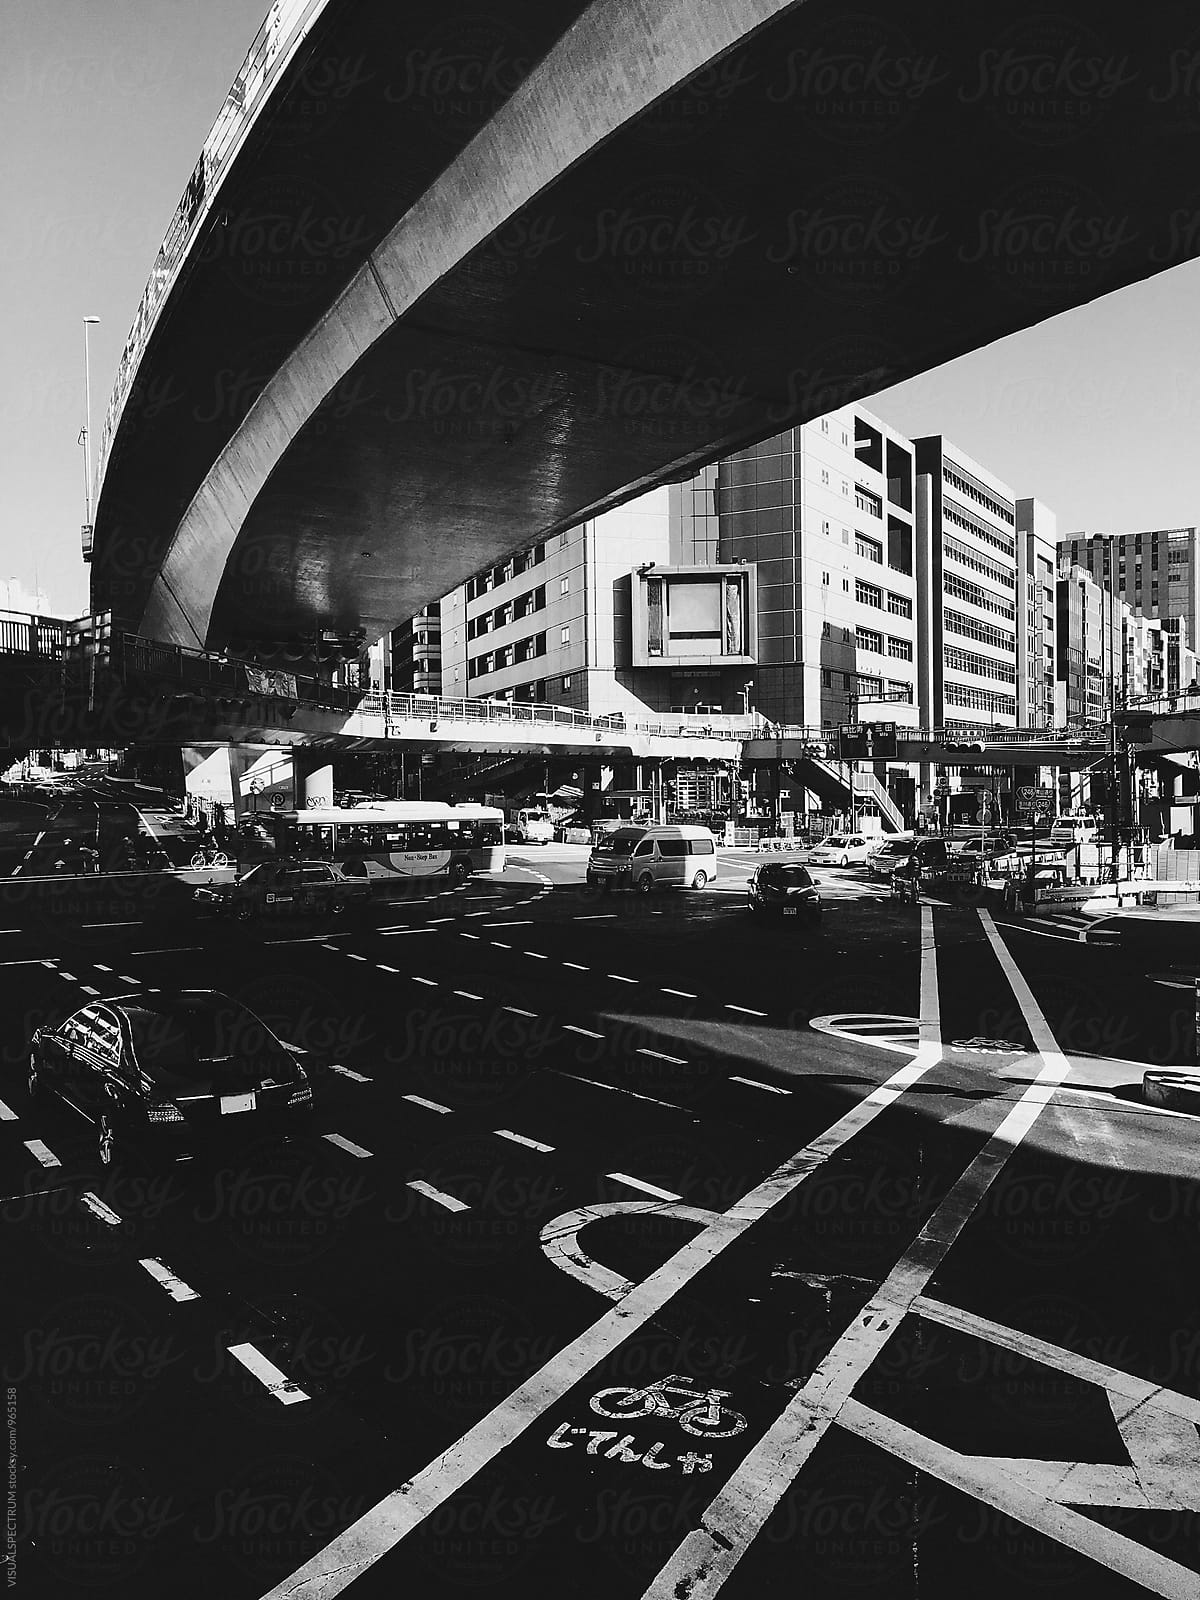 Tokyo Traffic - Busy Intersection in Black and White